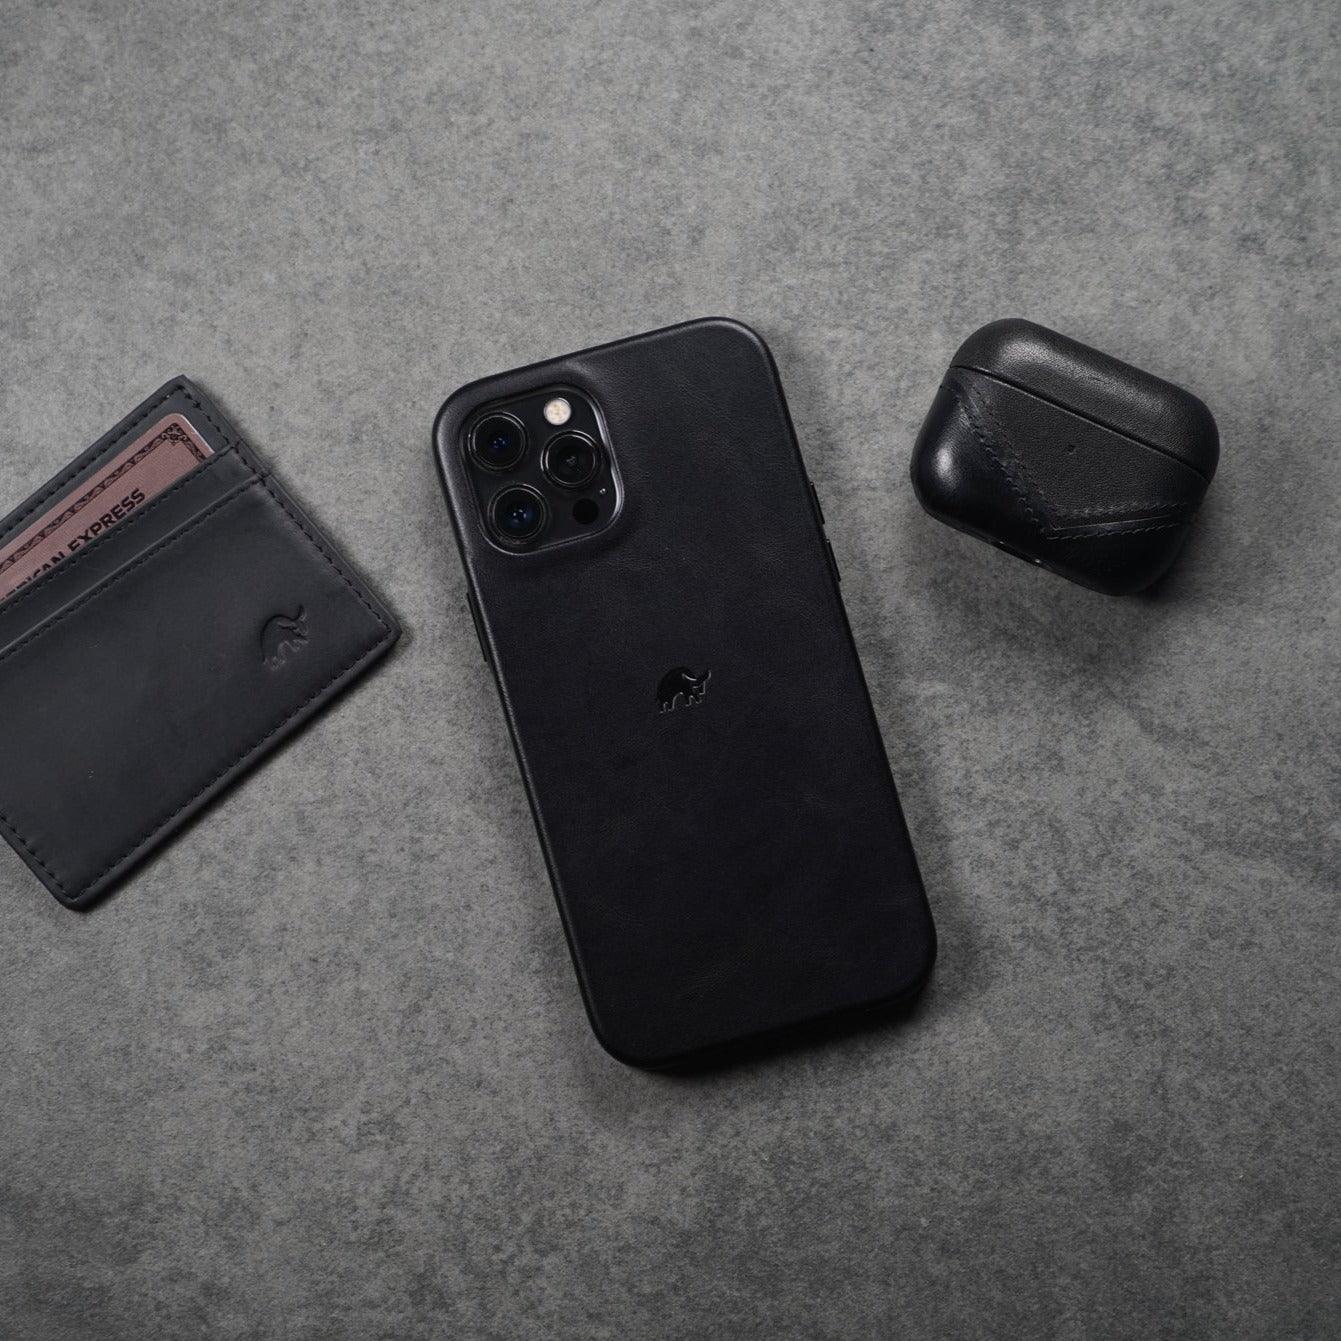 Leather AirPods Cases - BLACK EDITION by Bullstrap - The Hammer Sports